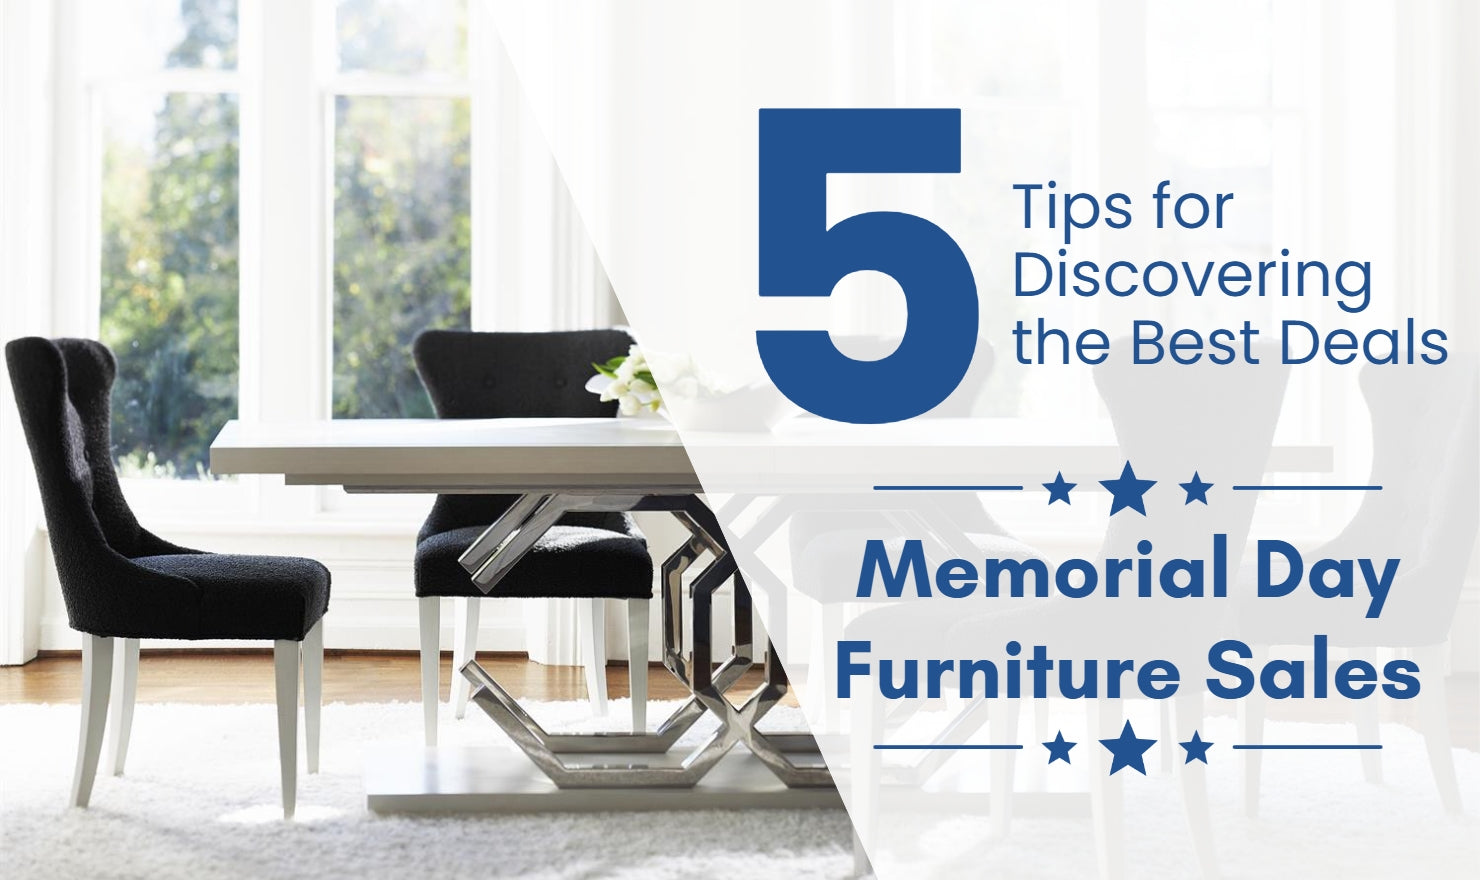 5 Tips for Discovering the Best Deals on Memorial Day Furniture Sales